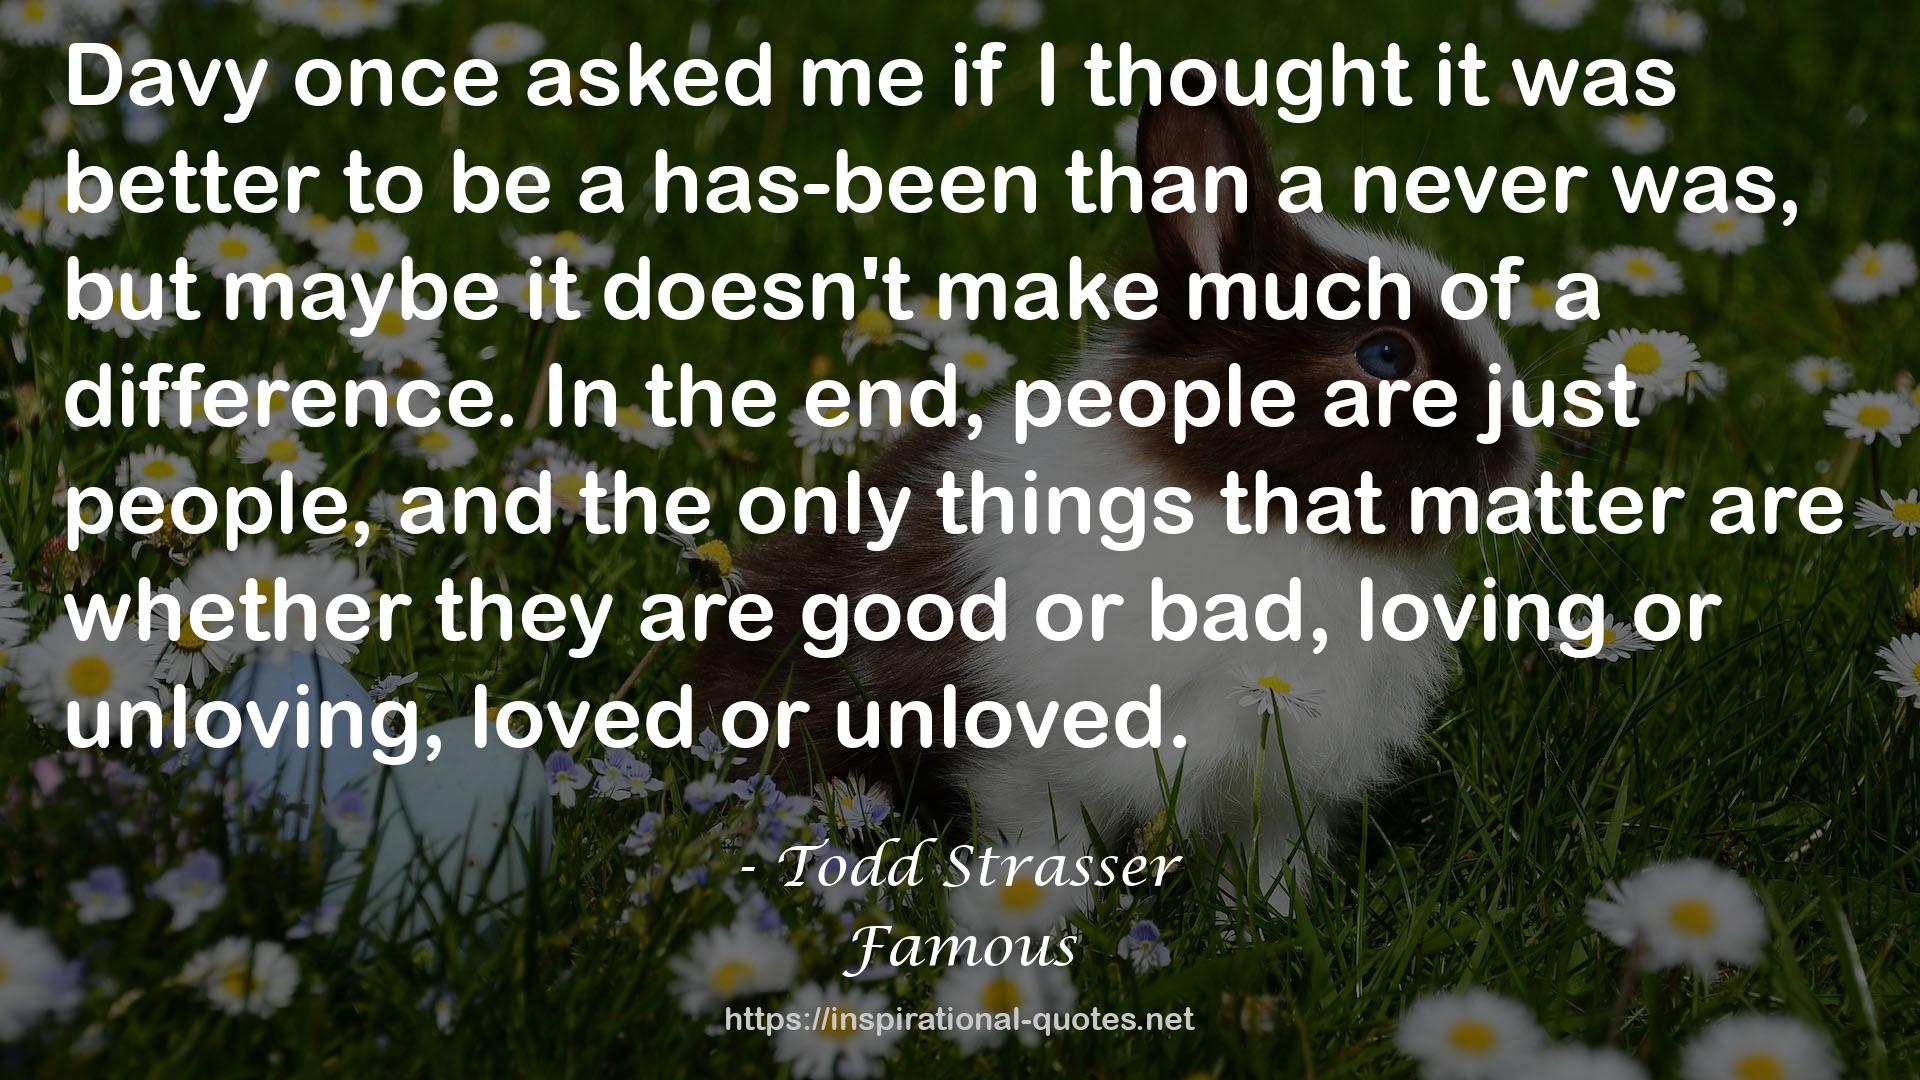 Todd Strasser QUOTES